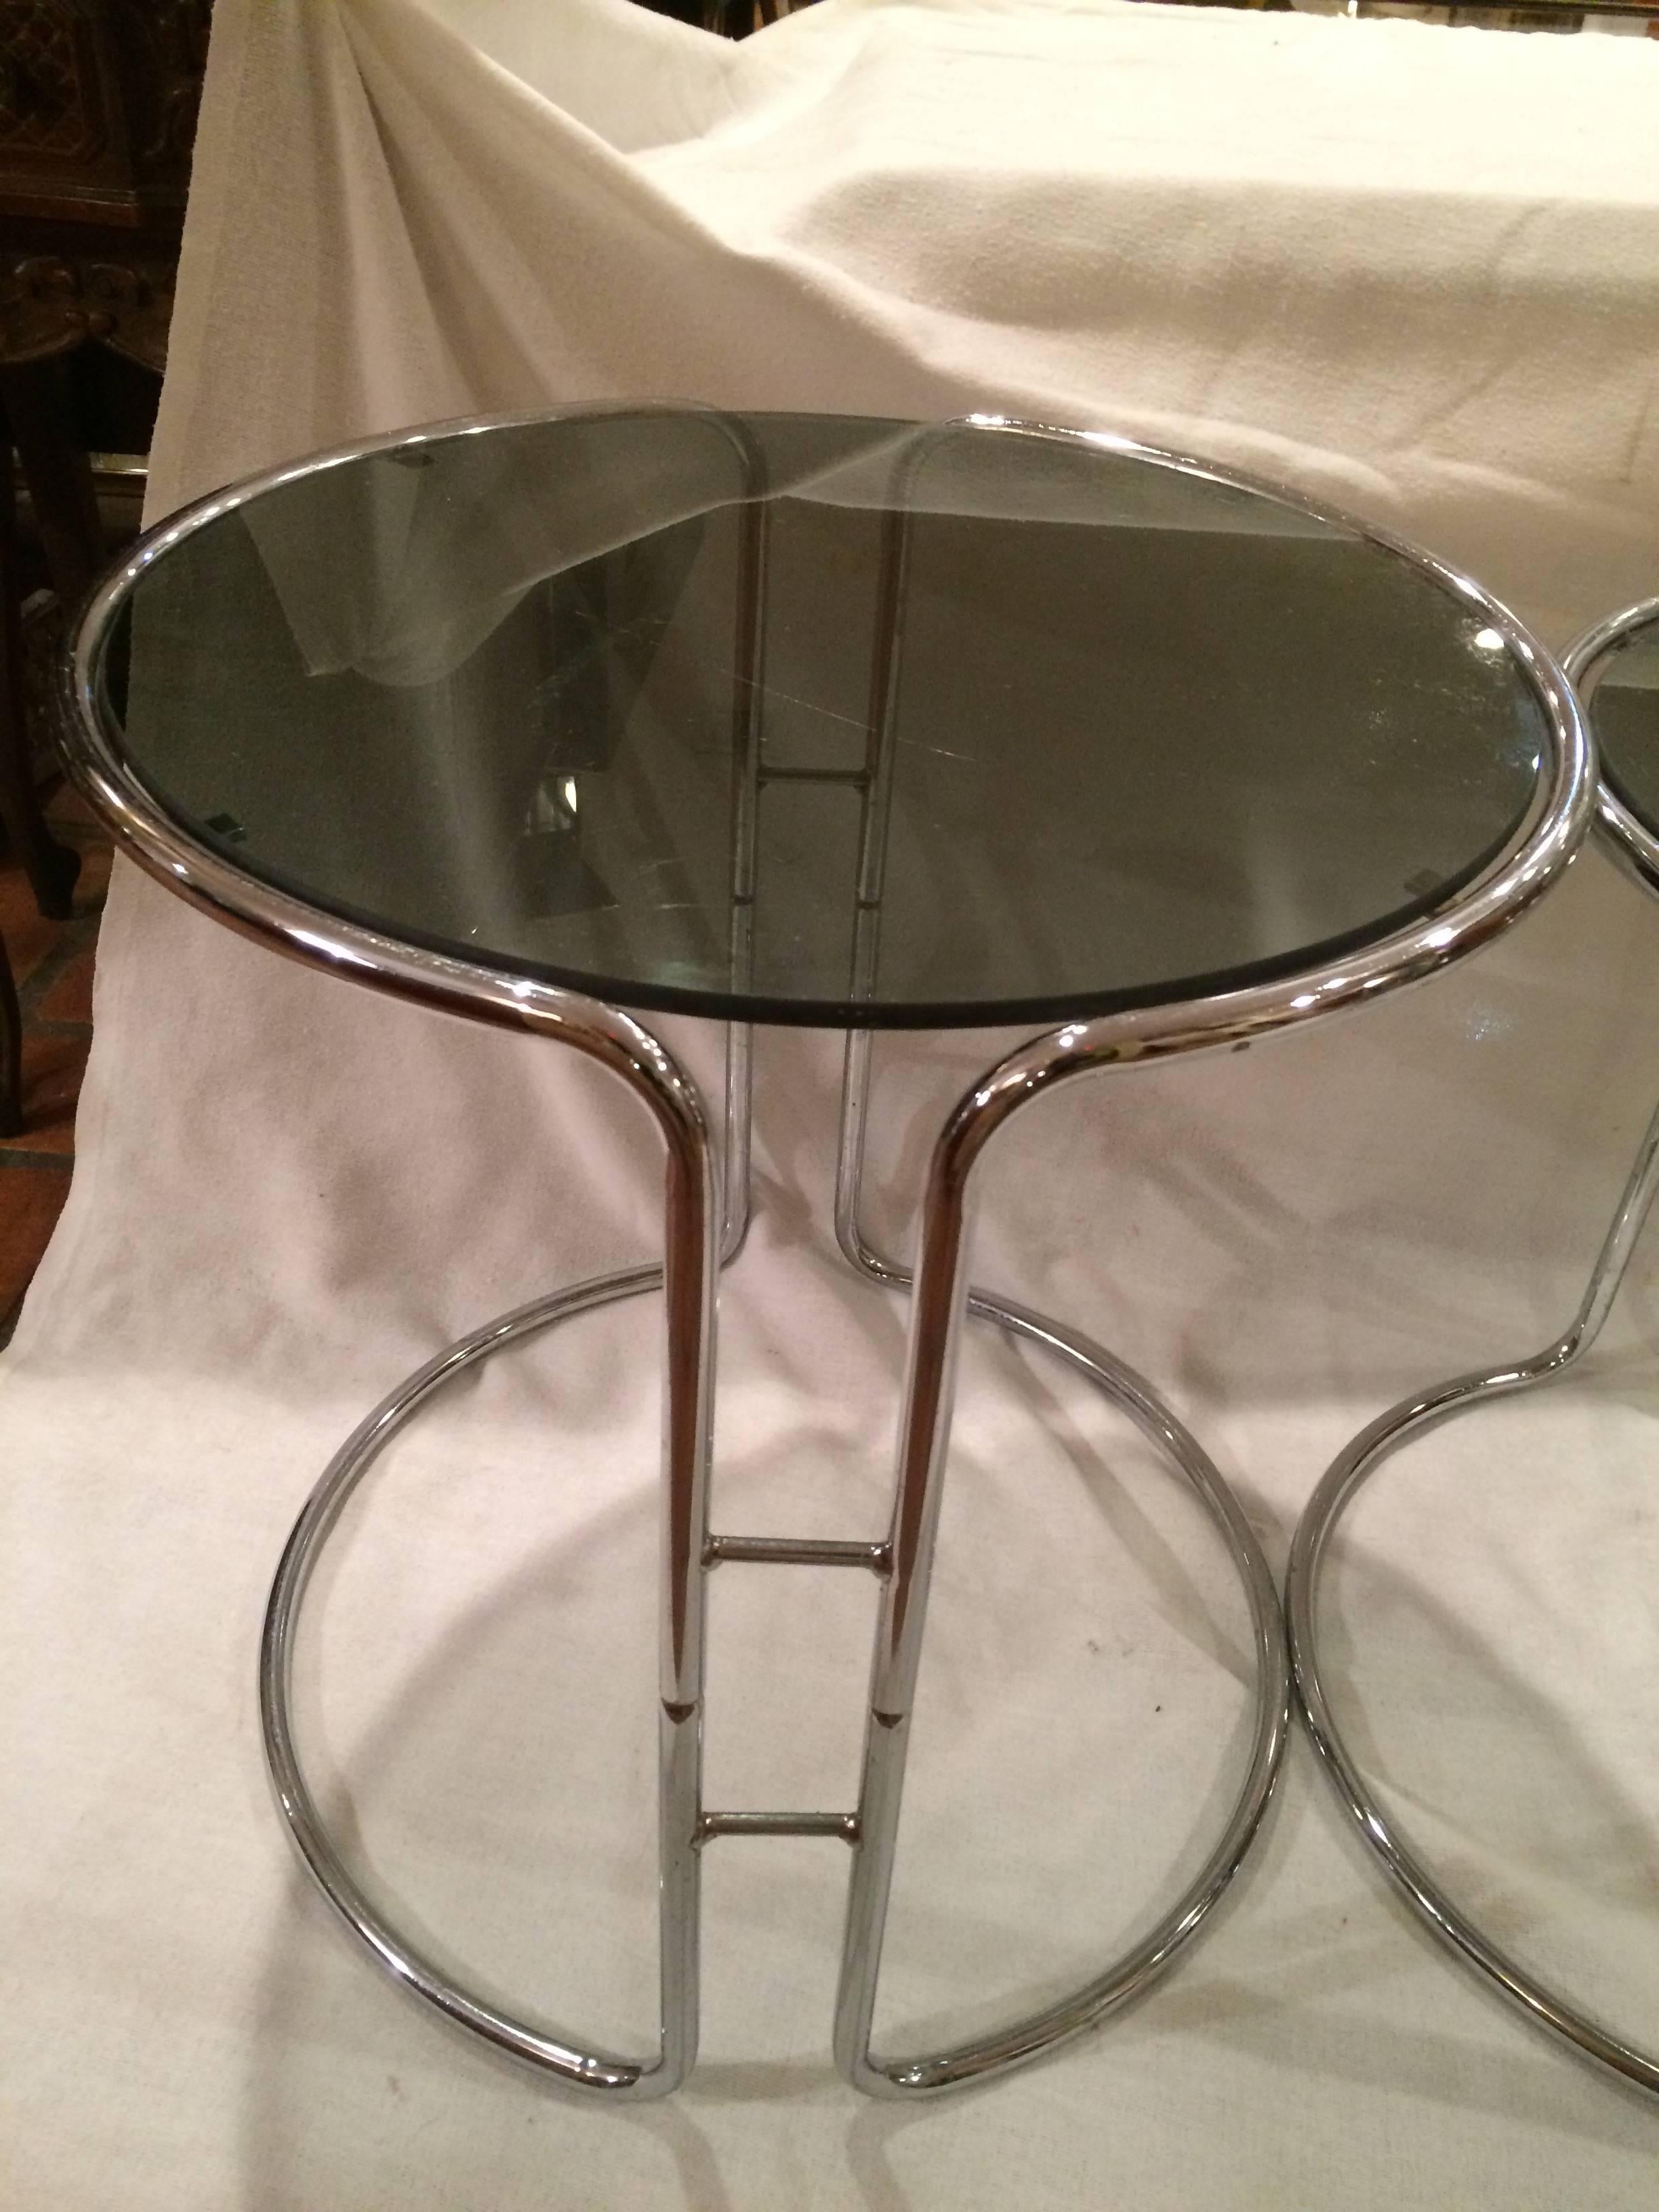 Plated Set of Three Milo Baughman Chrome and Smoked Glass Stacking Tables